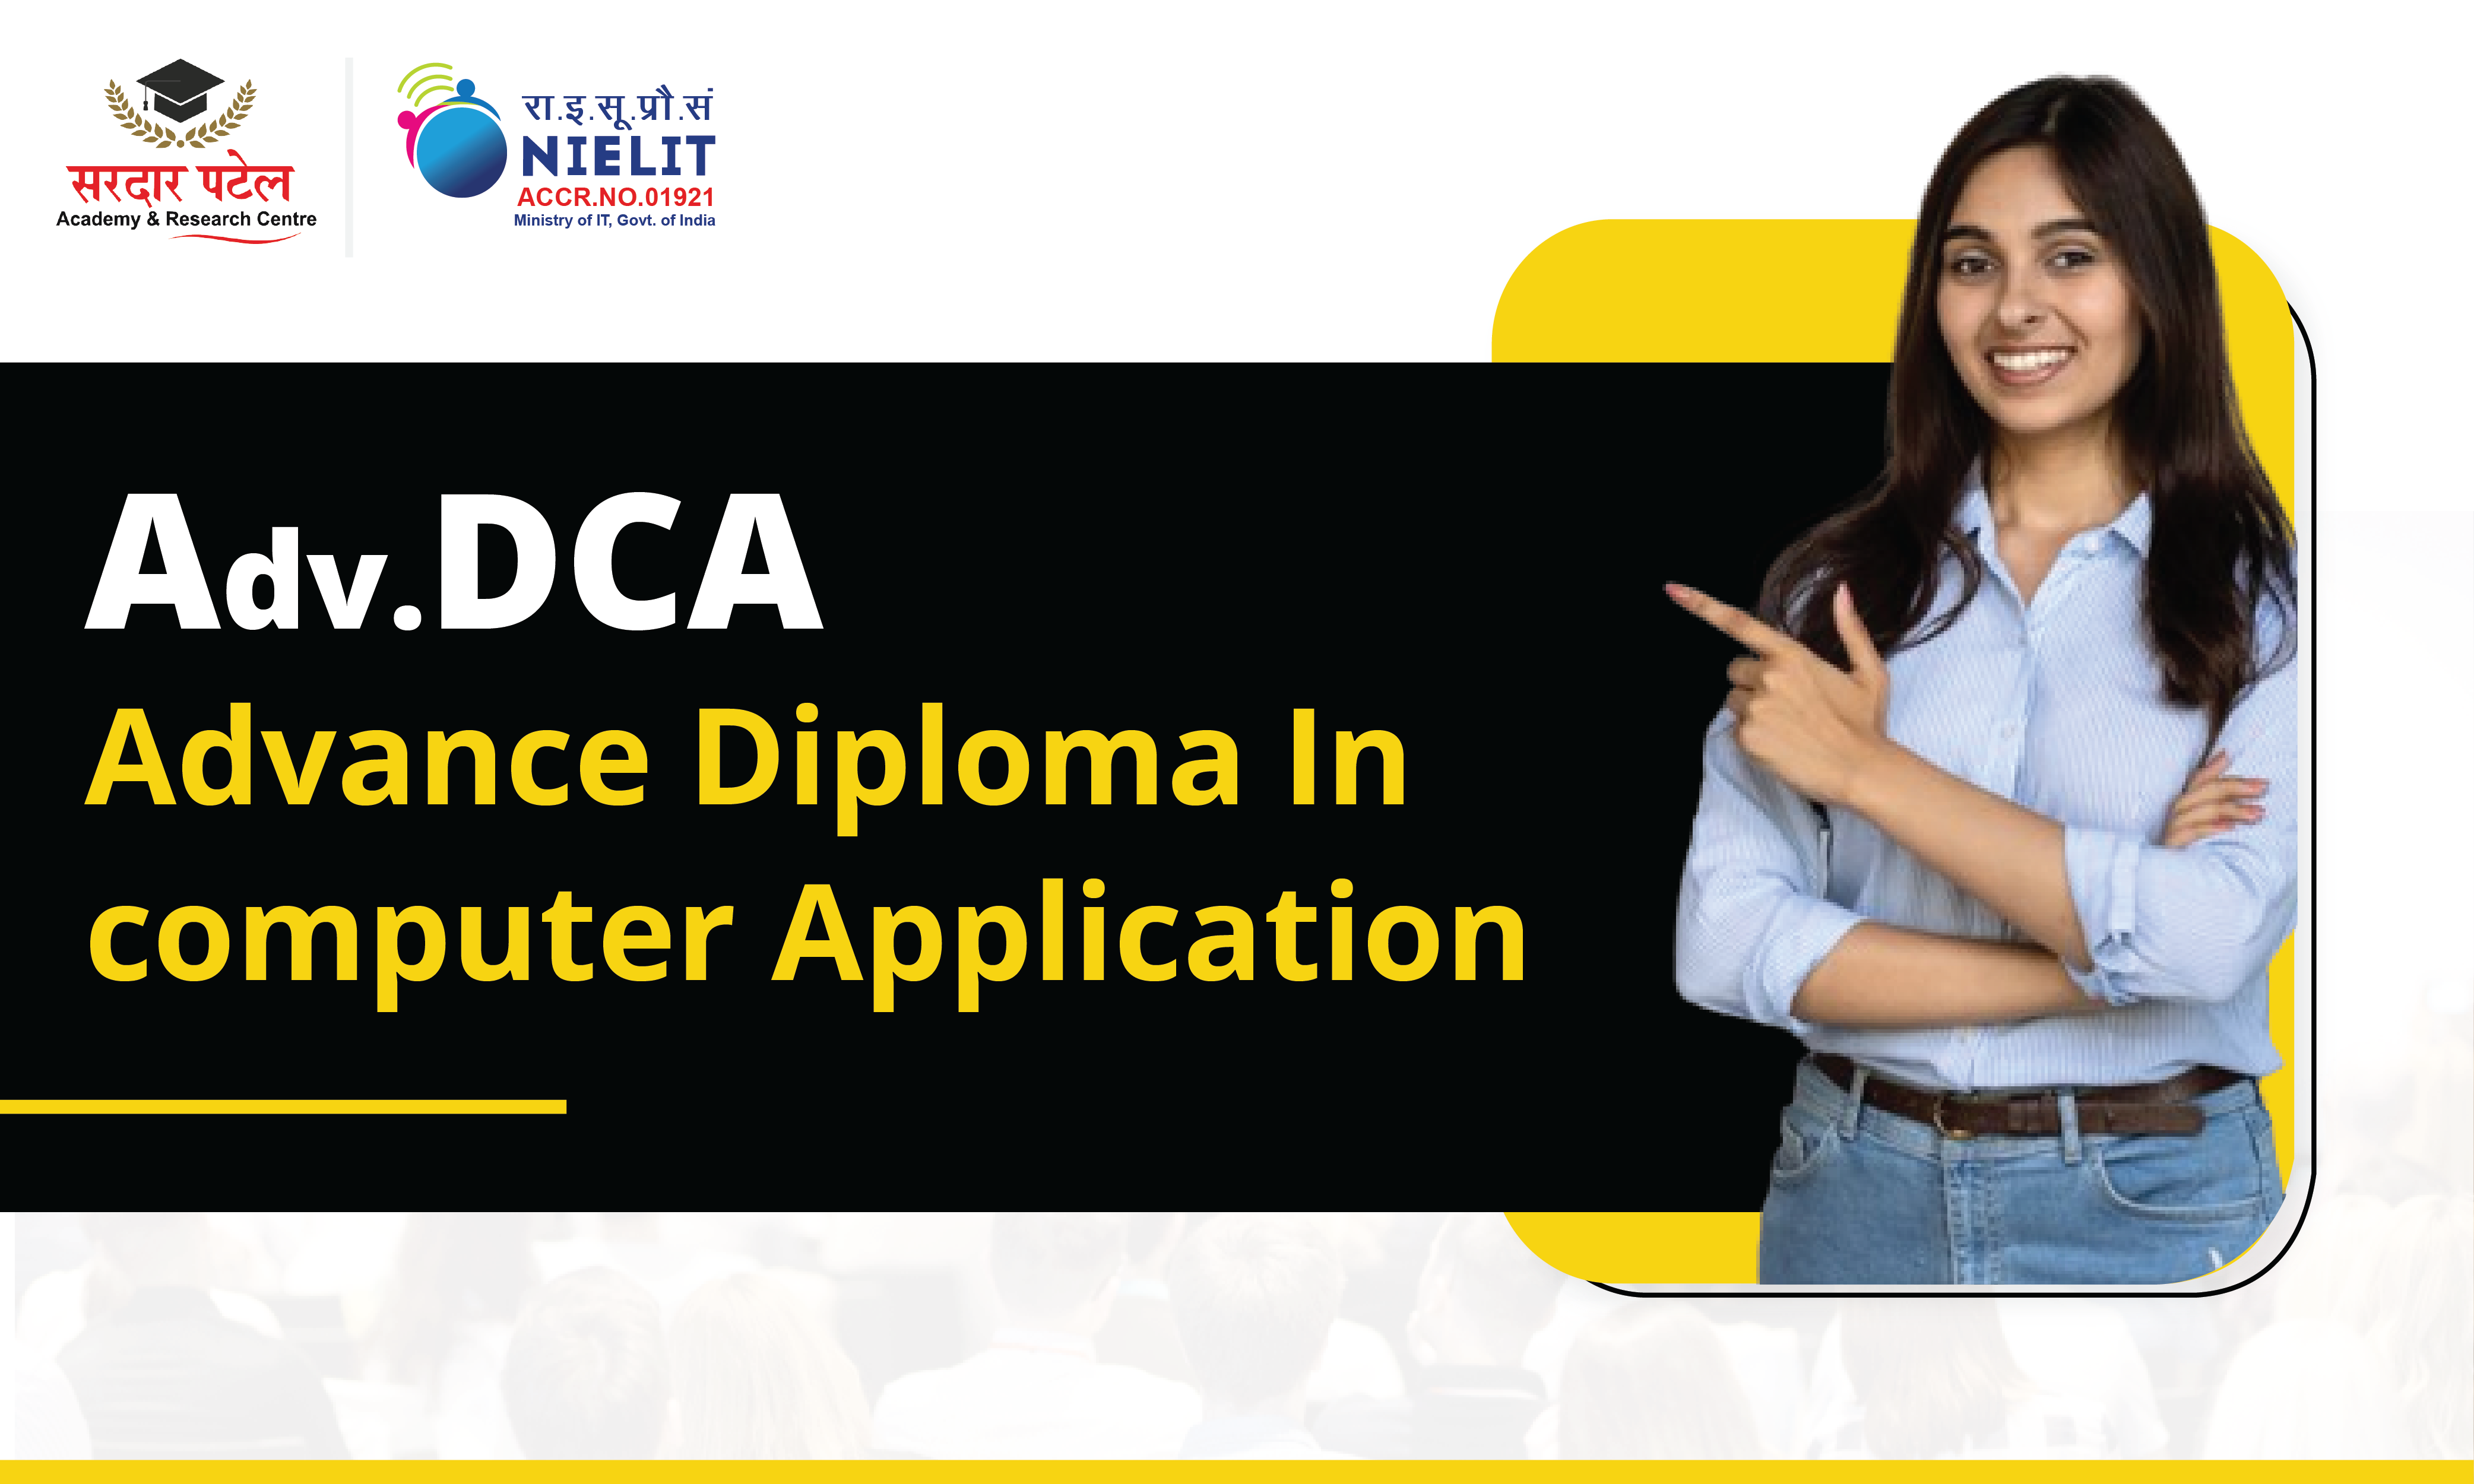 Advance Diploma In Computer Application - ADCA